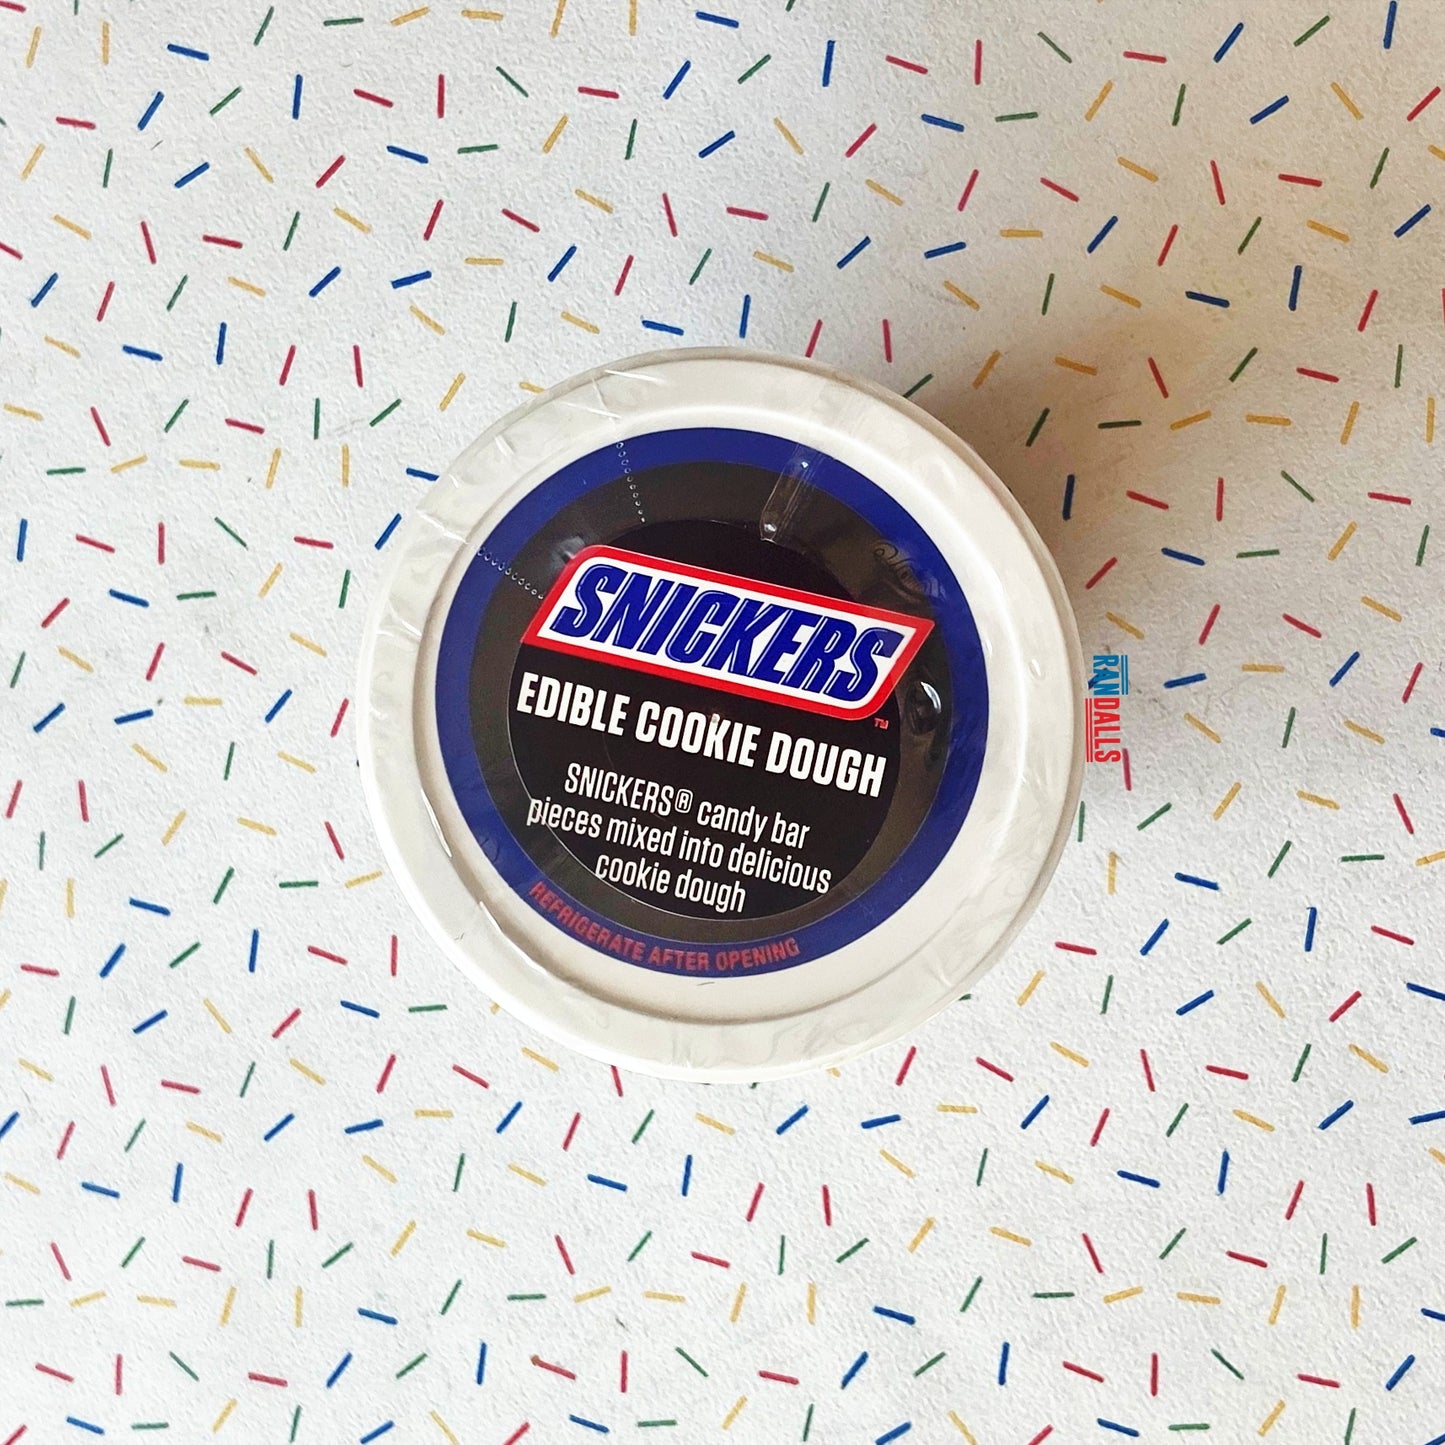 snickers edible cookie dough, snickers, cookie dough, ready to eat, snickers cookies, american snickers, usa, randalls,